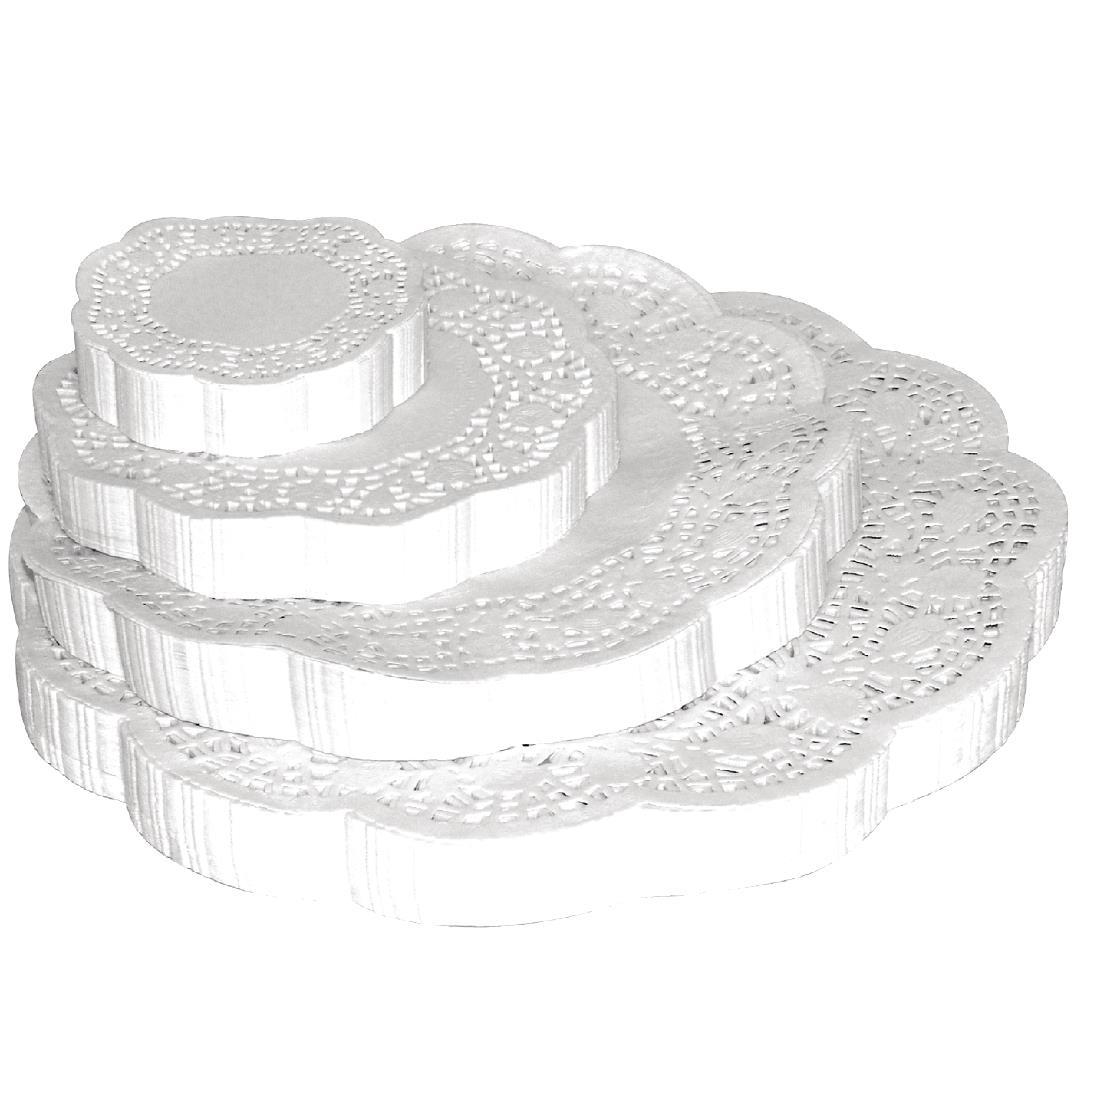 Fiesta Round Paper Doilies 300mm (Pack of 250) - CE993  - 2